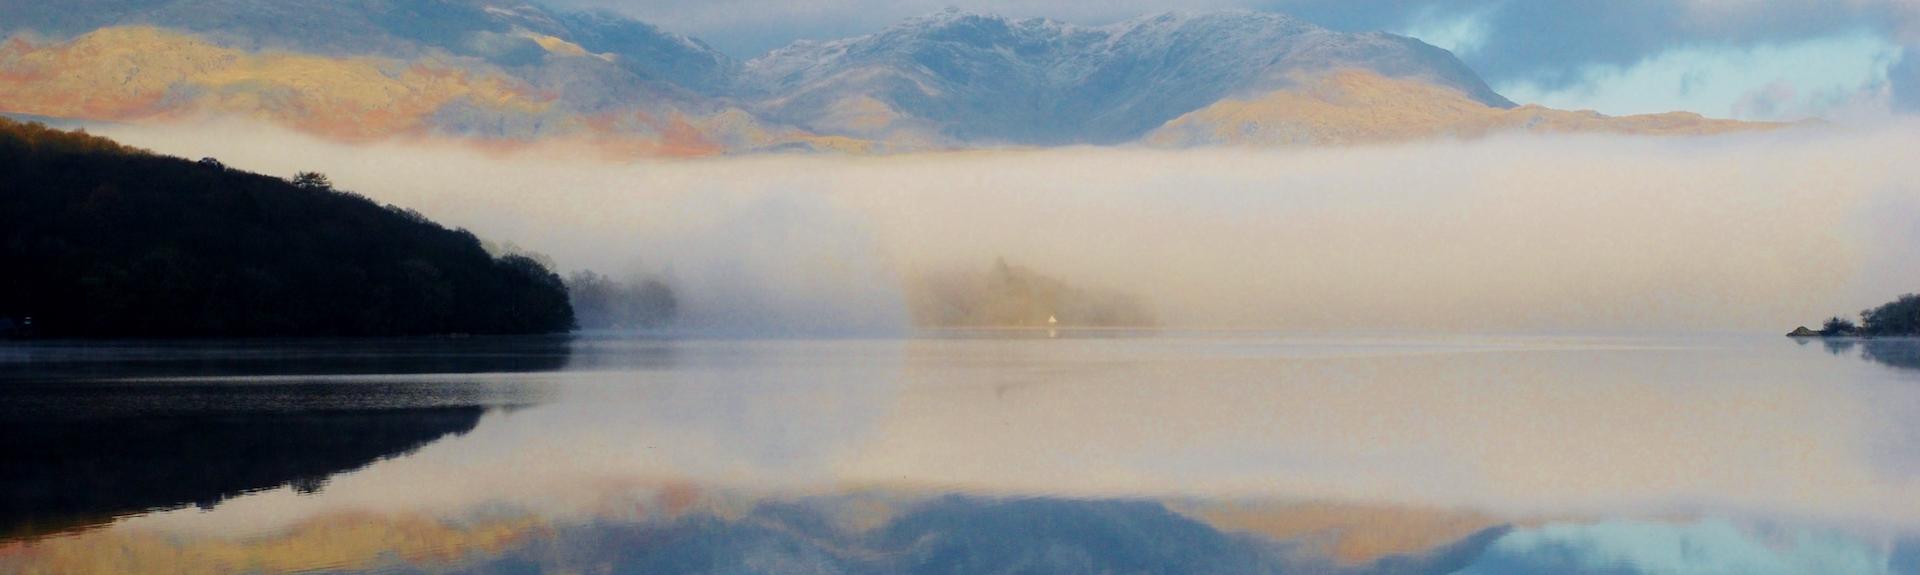 In the Lake District, a calm surface of a large lake reflects the fleecy cloud-filled sky above